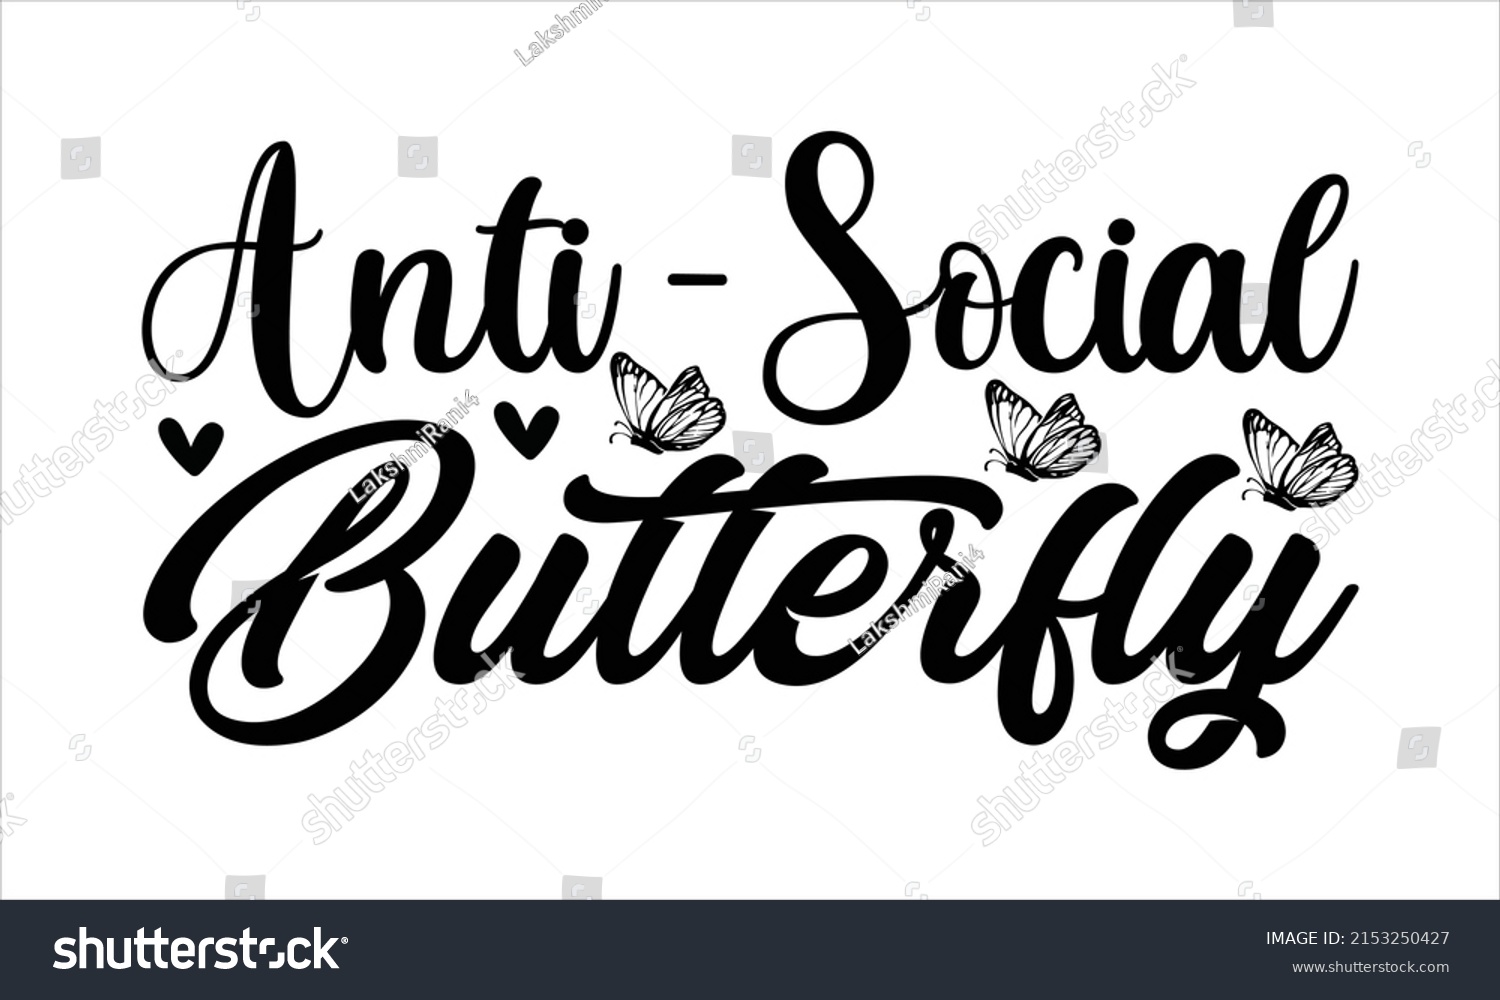 SVG of Anti - social butterfly  -   Lettering design for greeting banners, Mouse Pads, Prints, Cards and Posters, Mugs, Notebooks, Floor Pillows and T-shirt prints design.
 svg